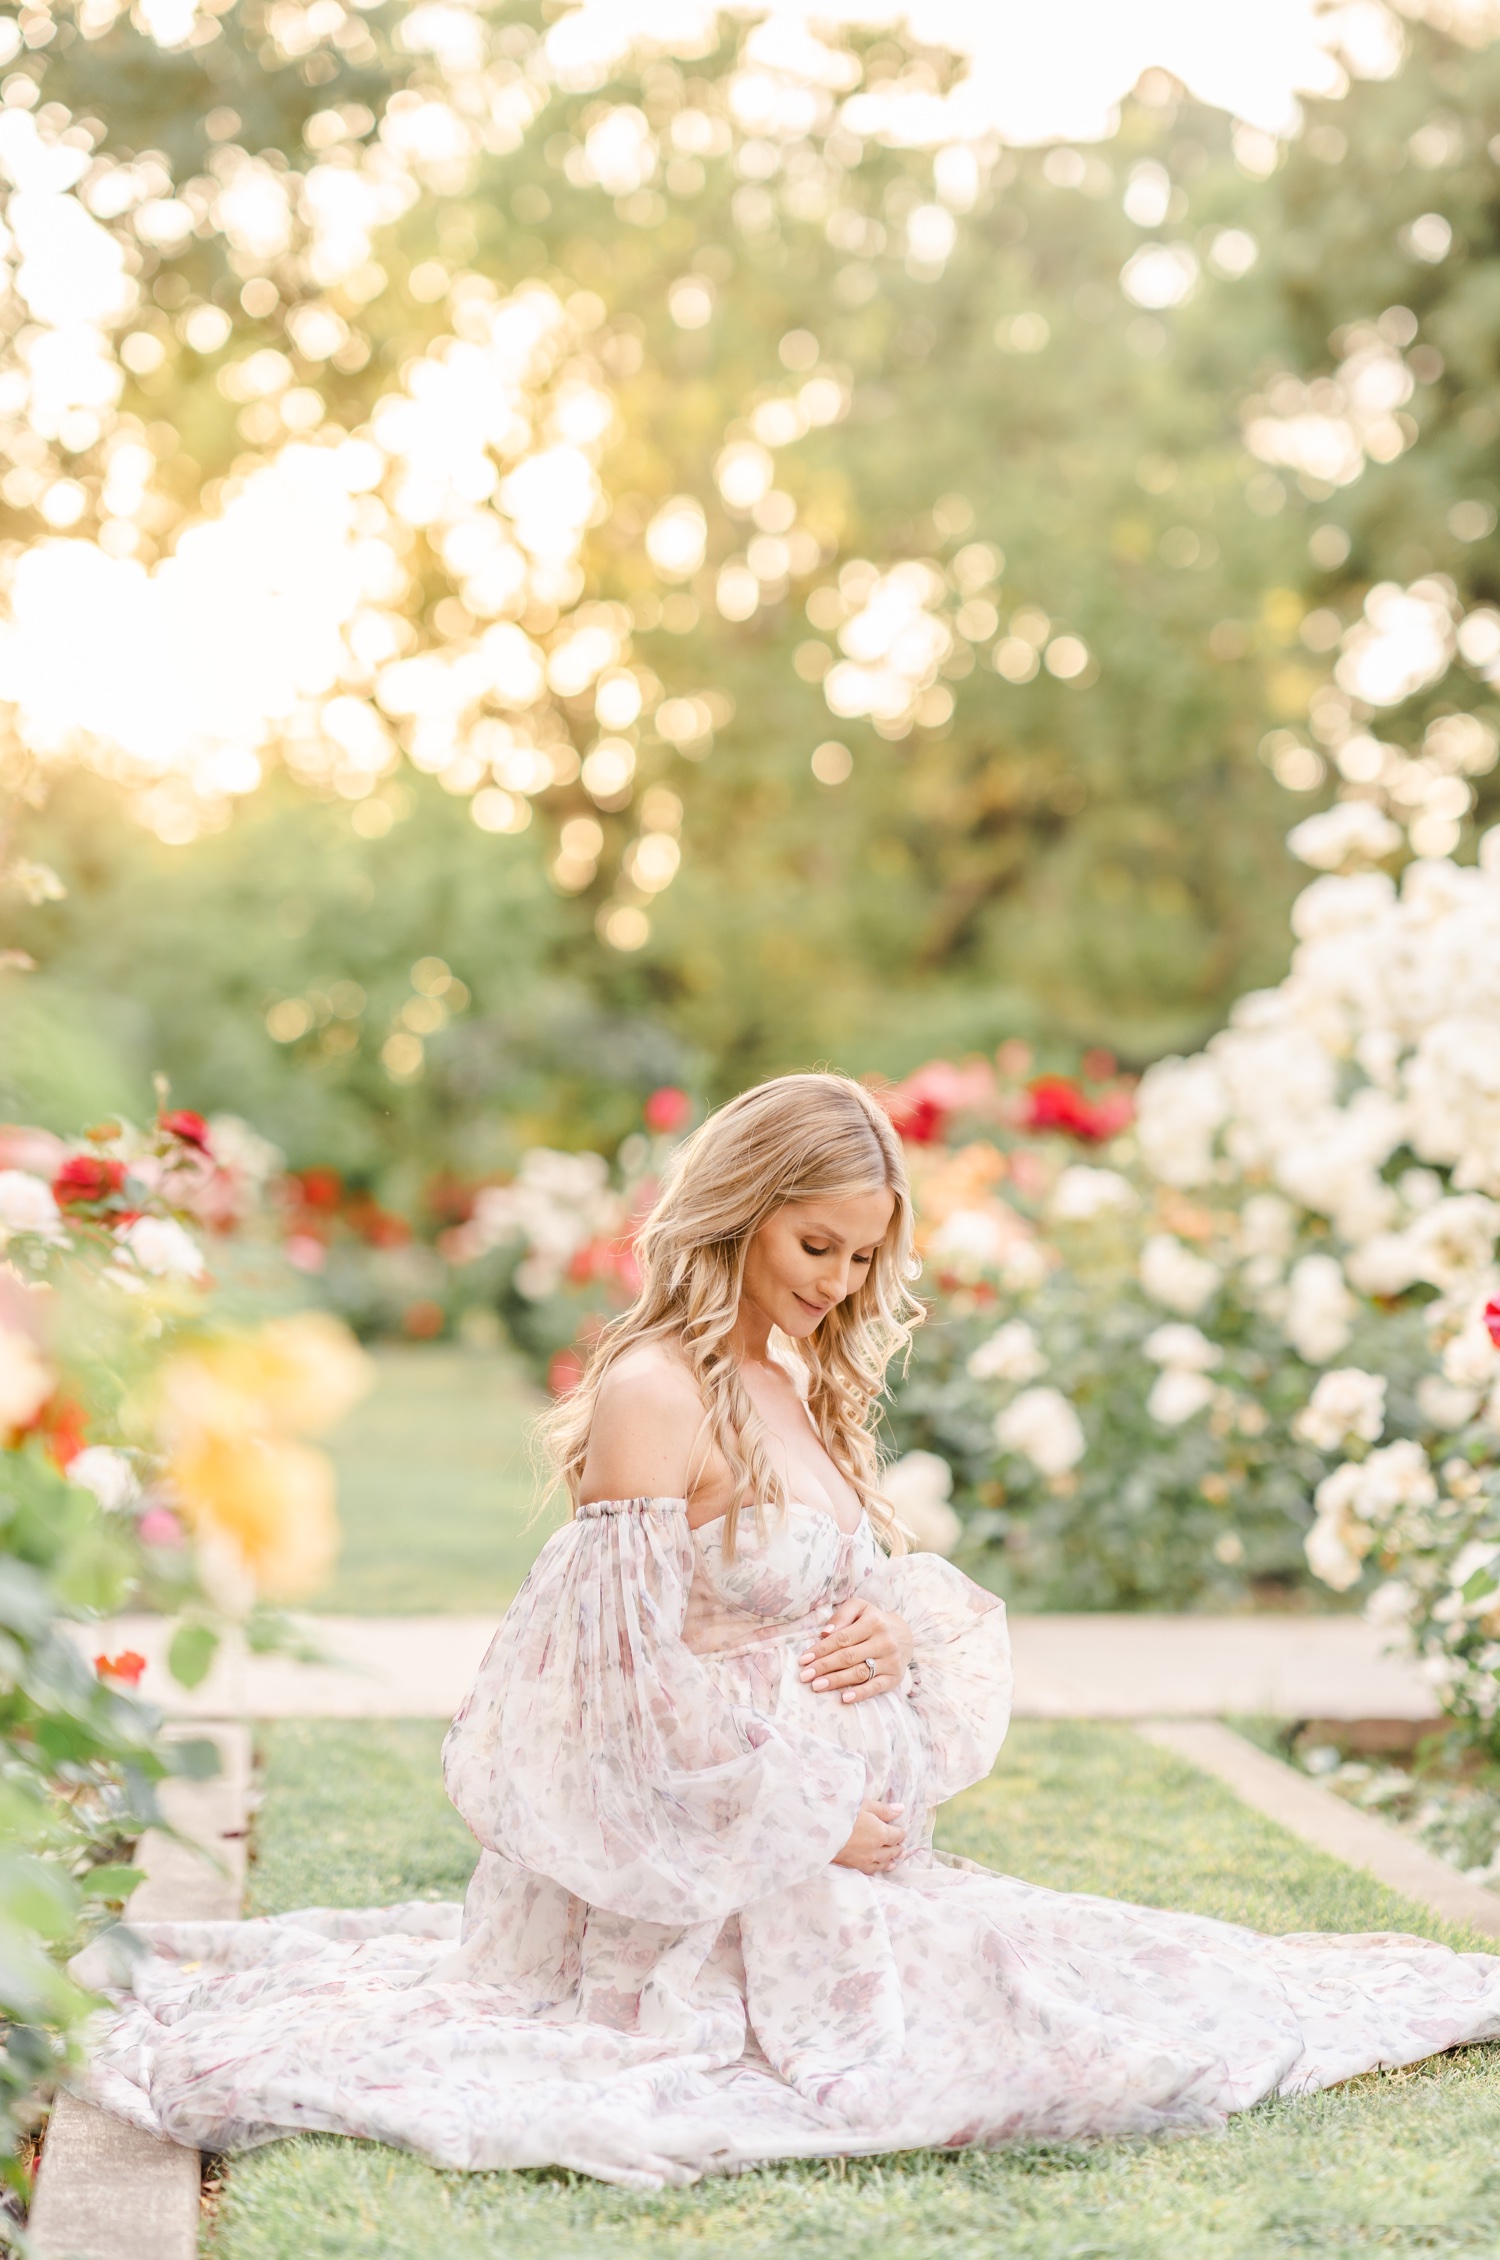 Woman Wearing a Pink Dress Sitting in a Garden · Free Stock Photo